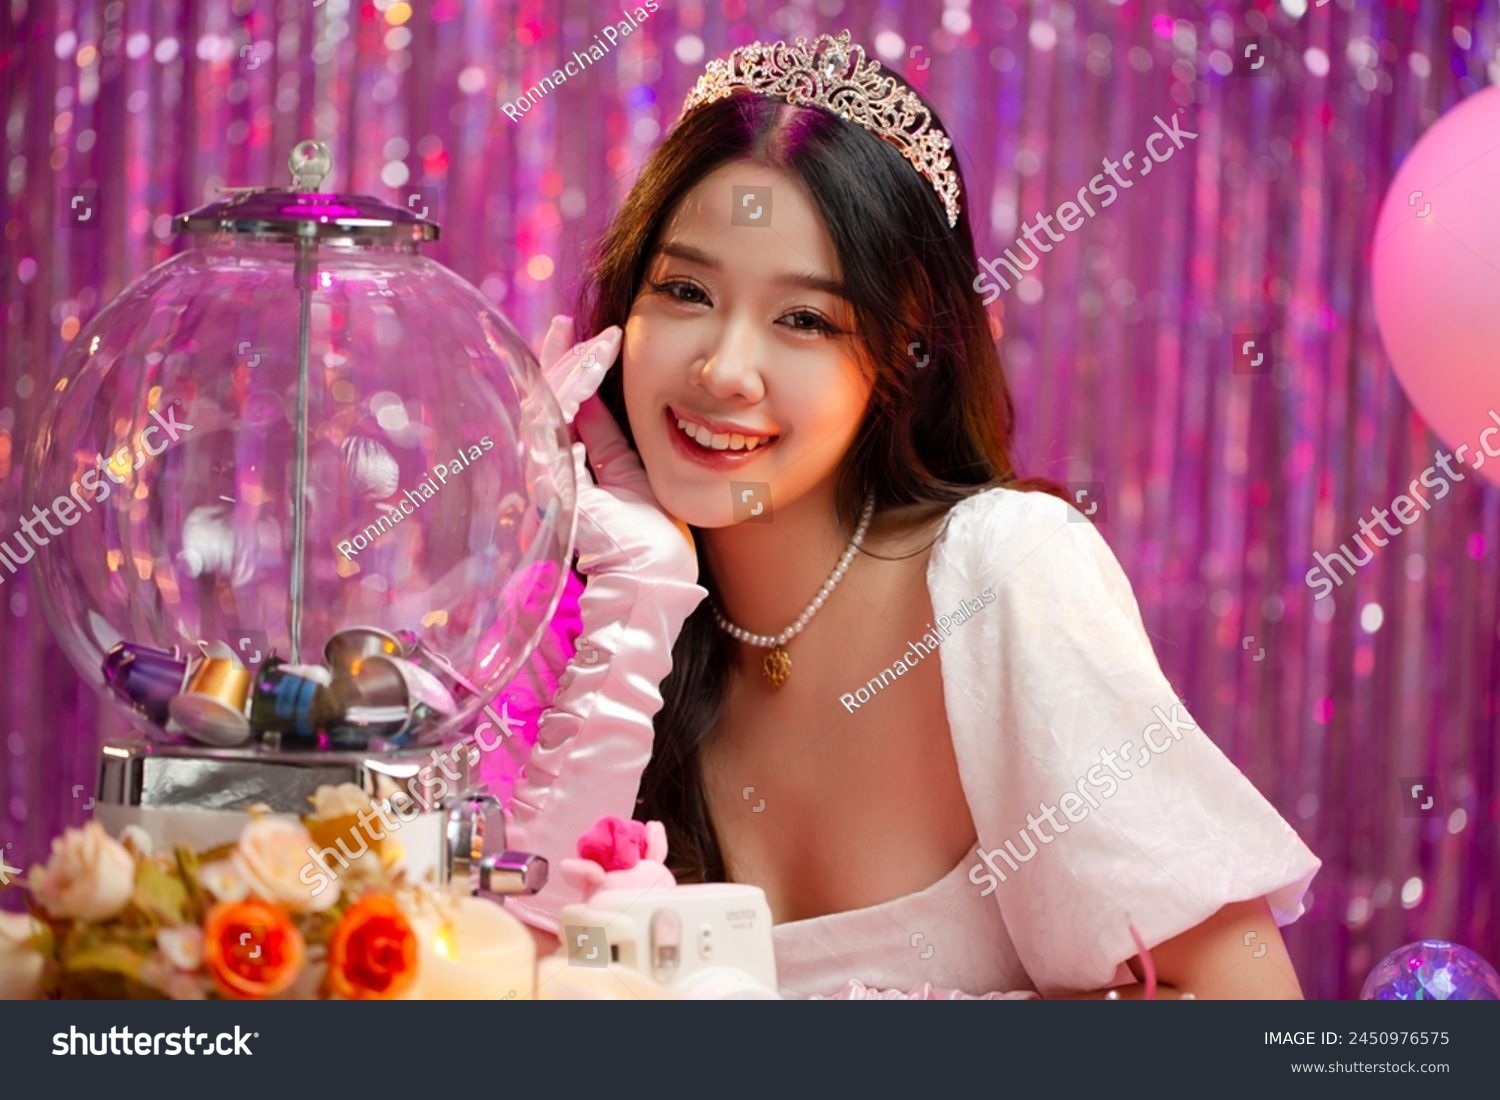 Happy beautiful Asian girl in princess dress showing birthday cake. Birthday princess photography theme is popular in social network. #2450976575